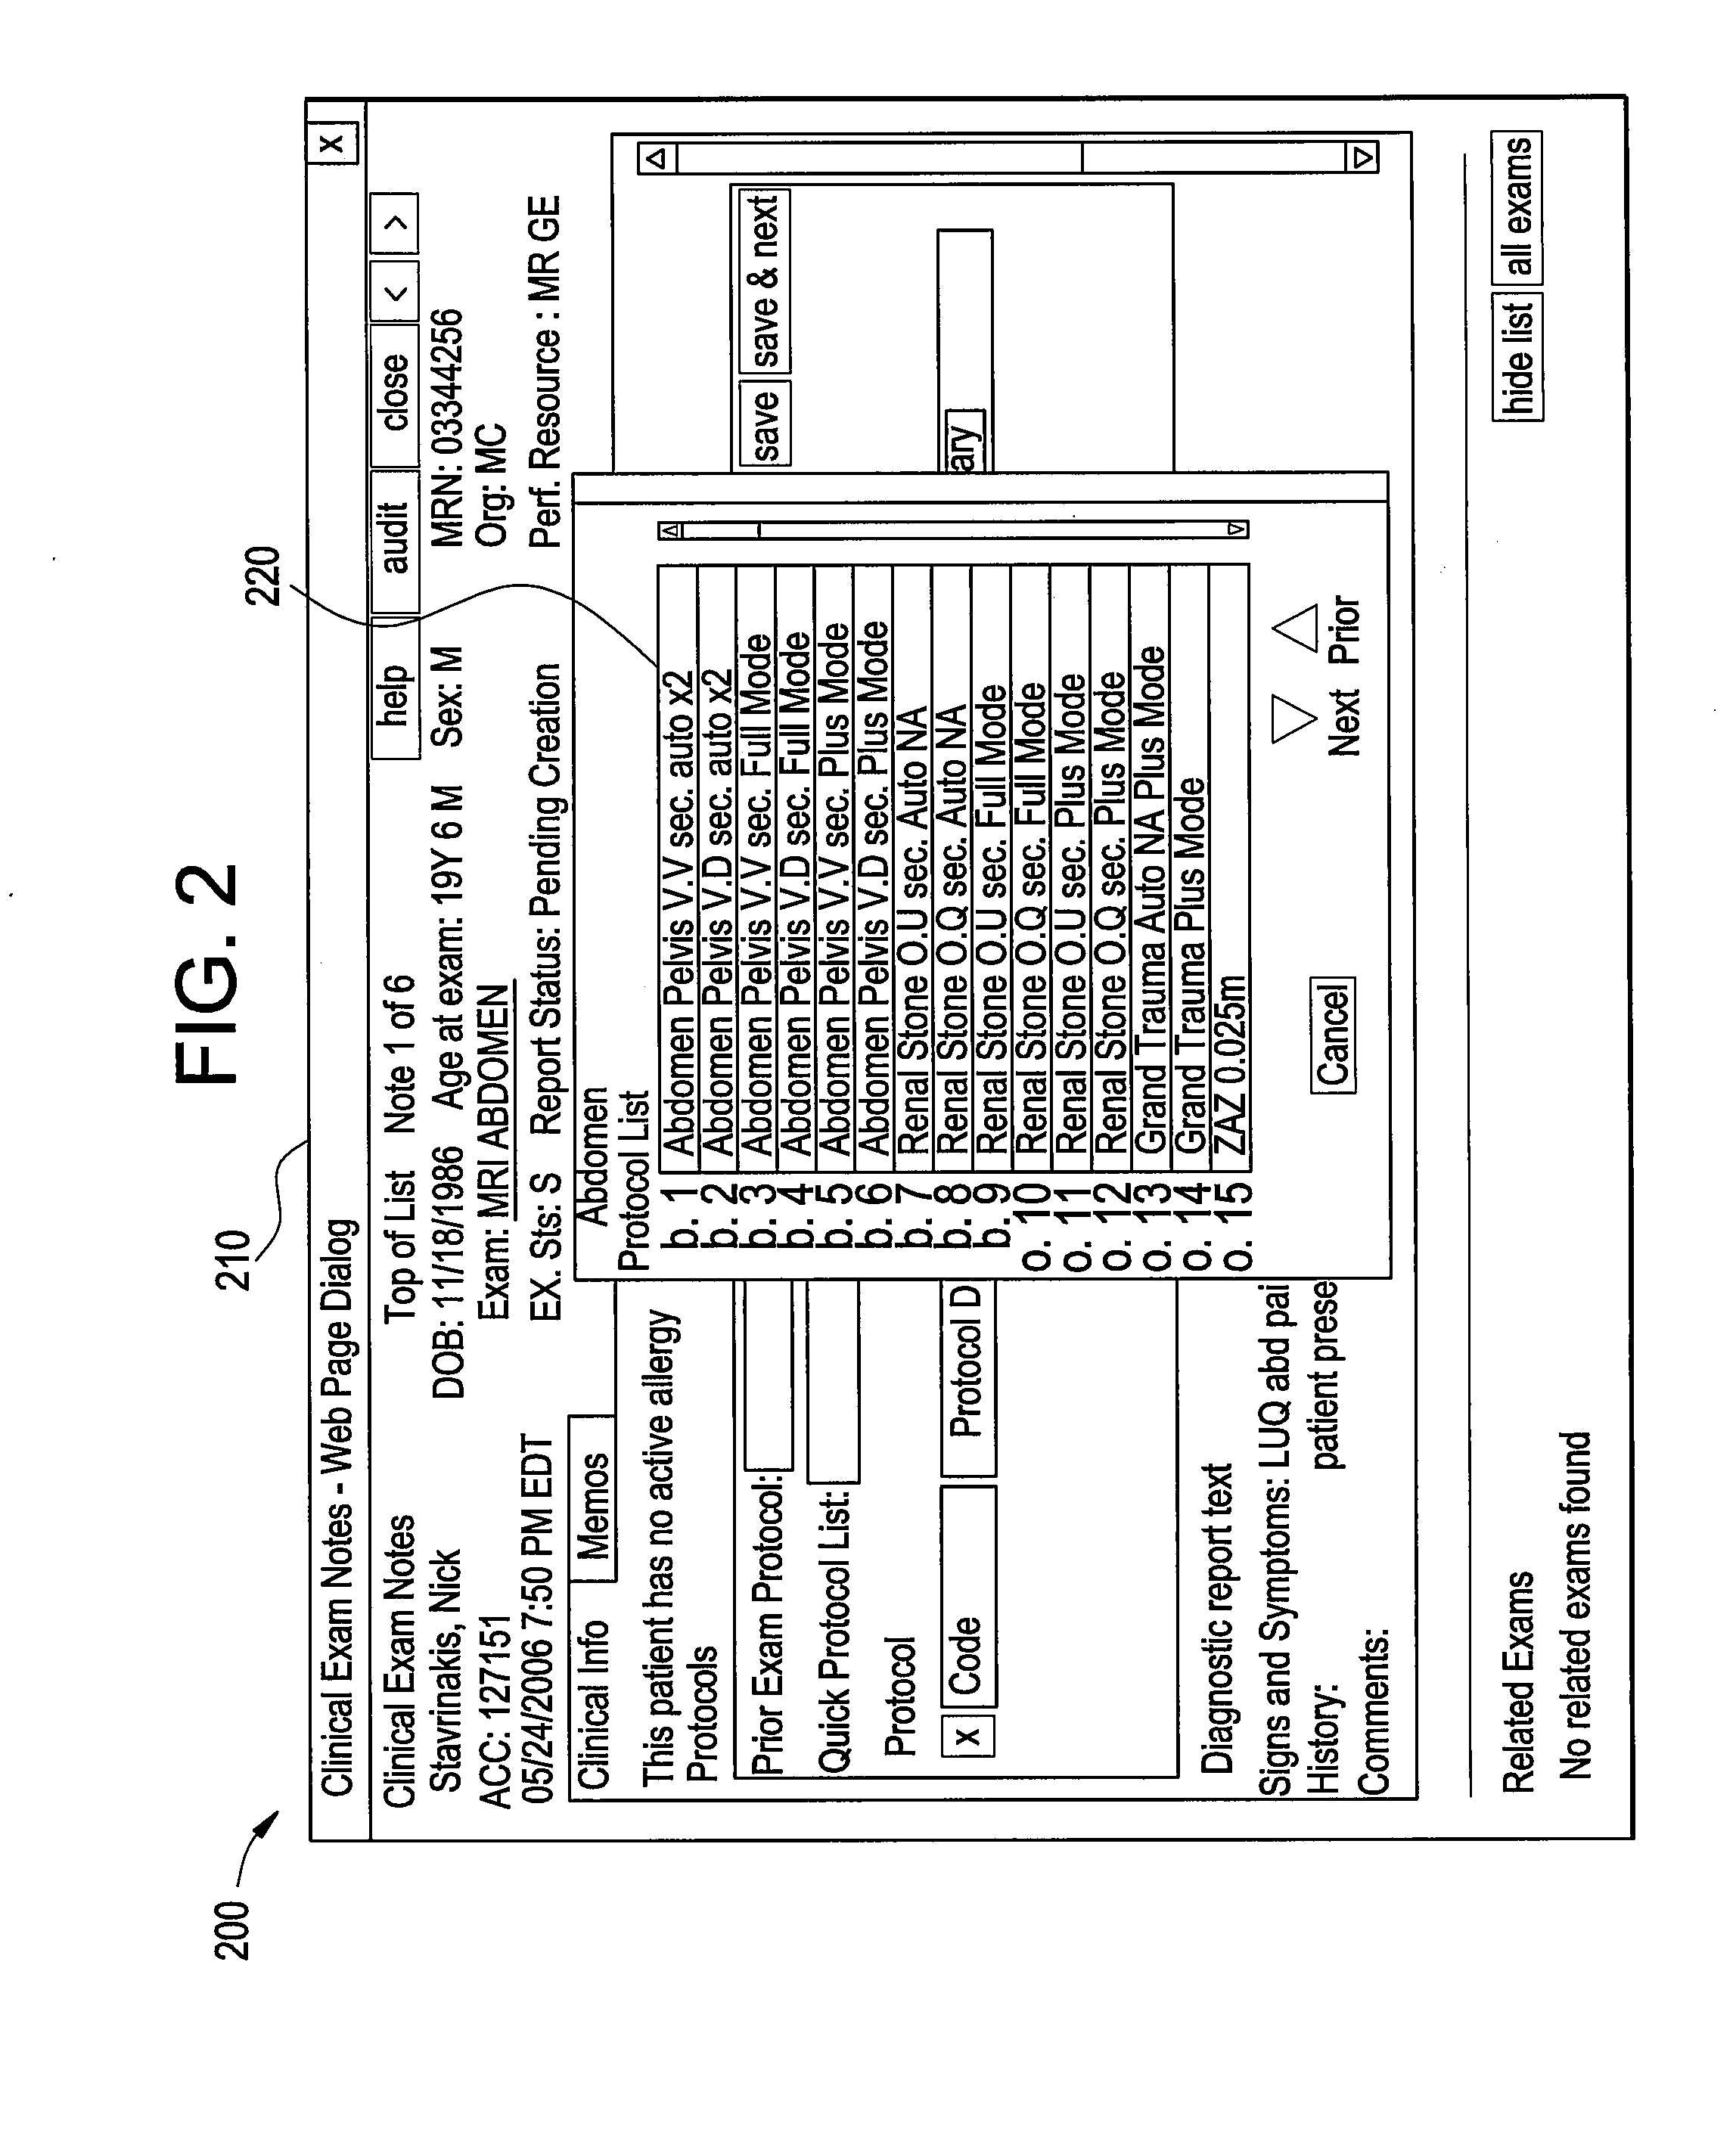 Interactive protocoling between a radiology information system and a diagnostic system/modality